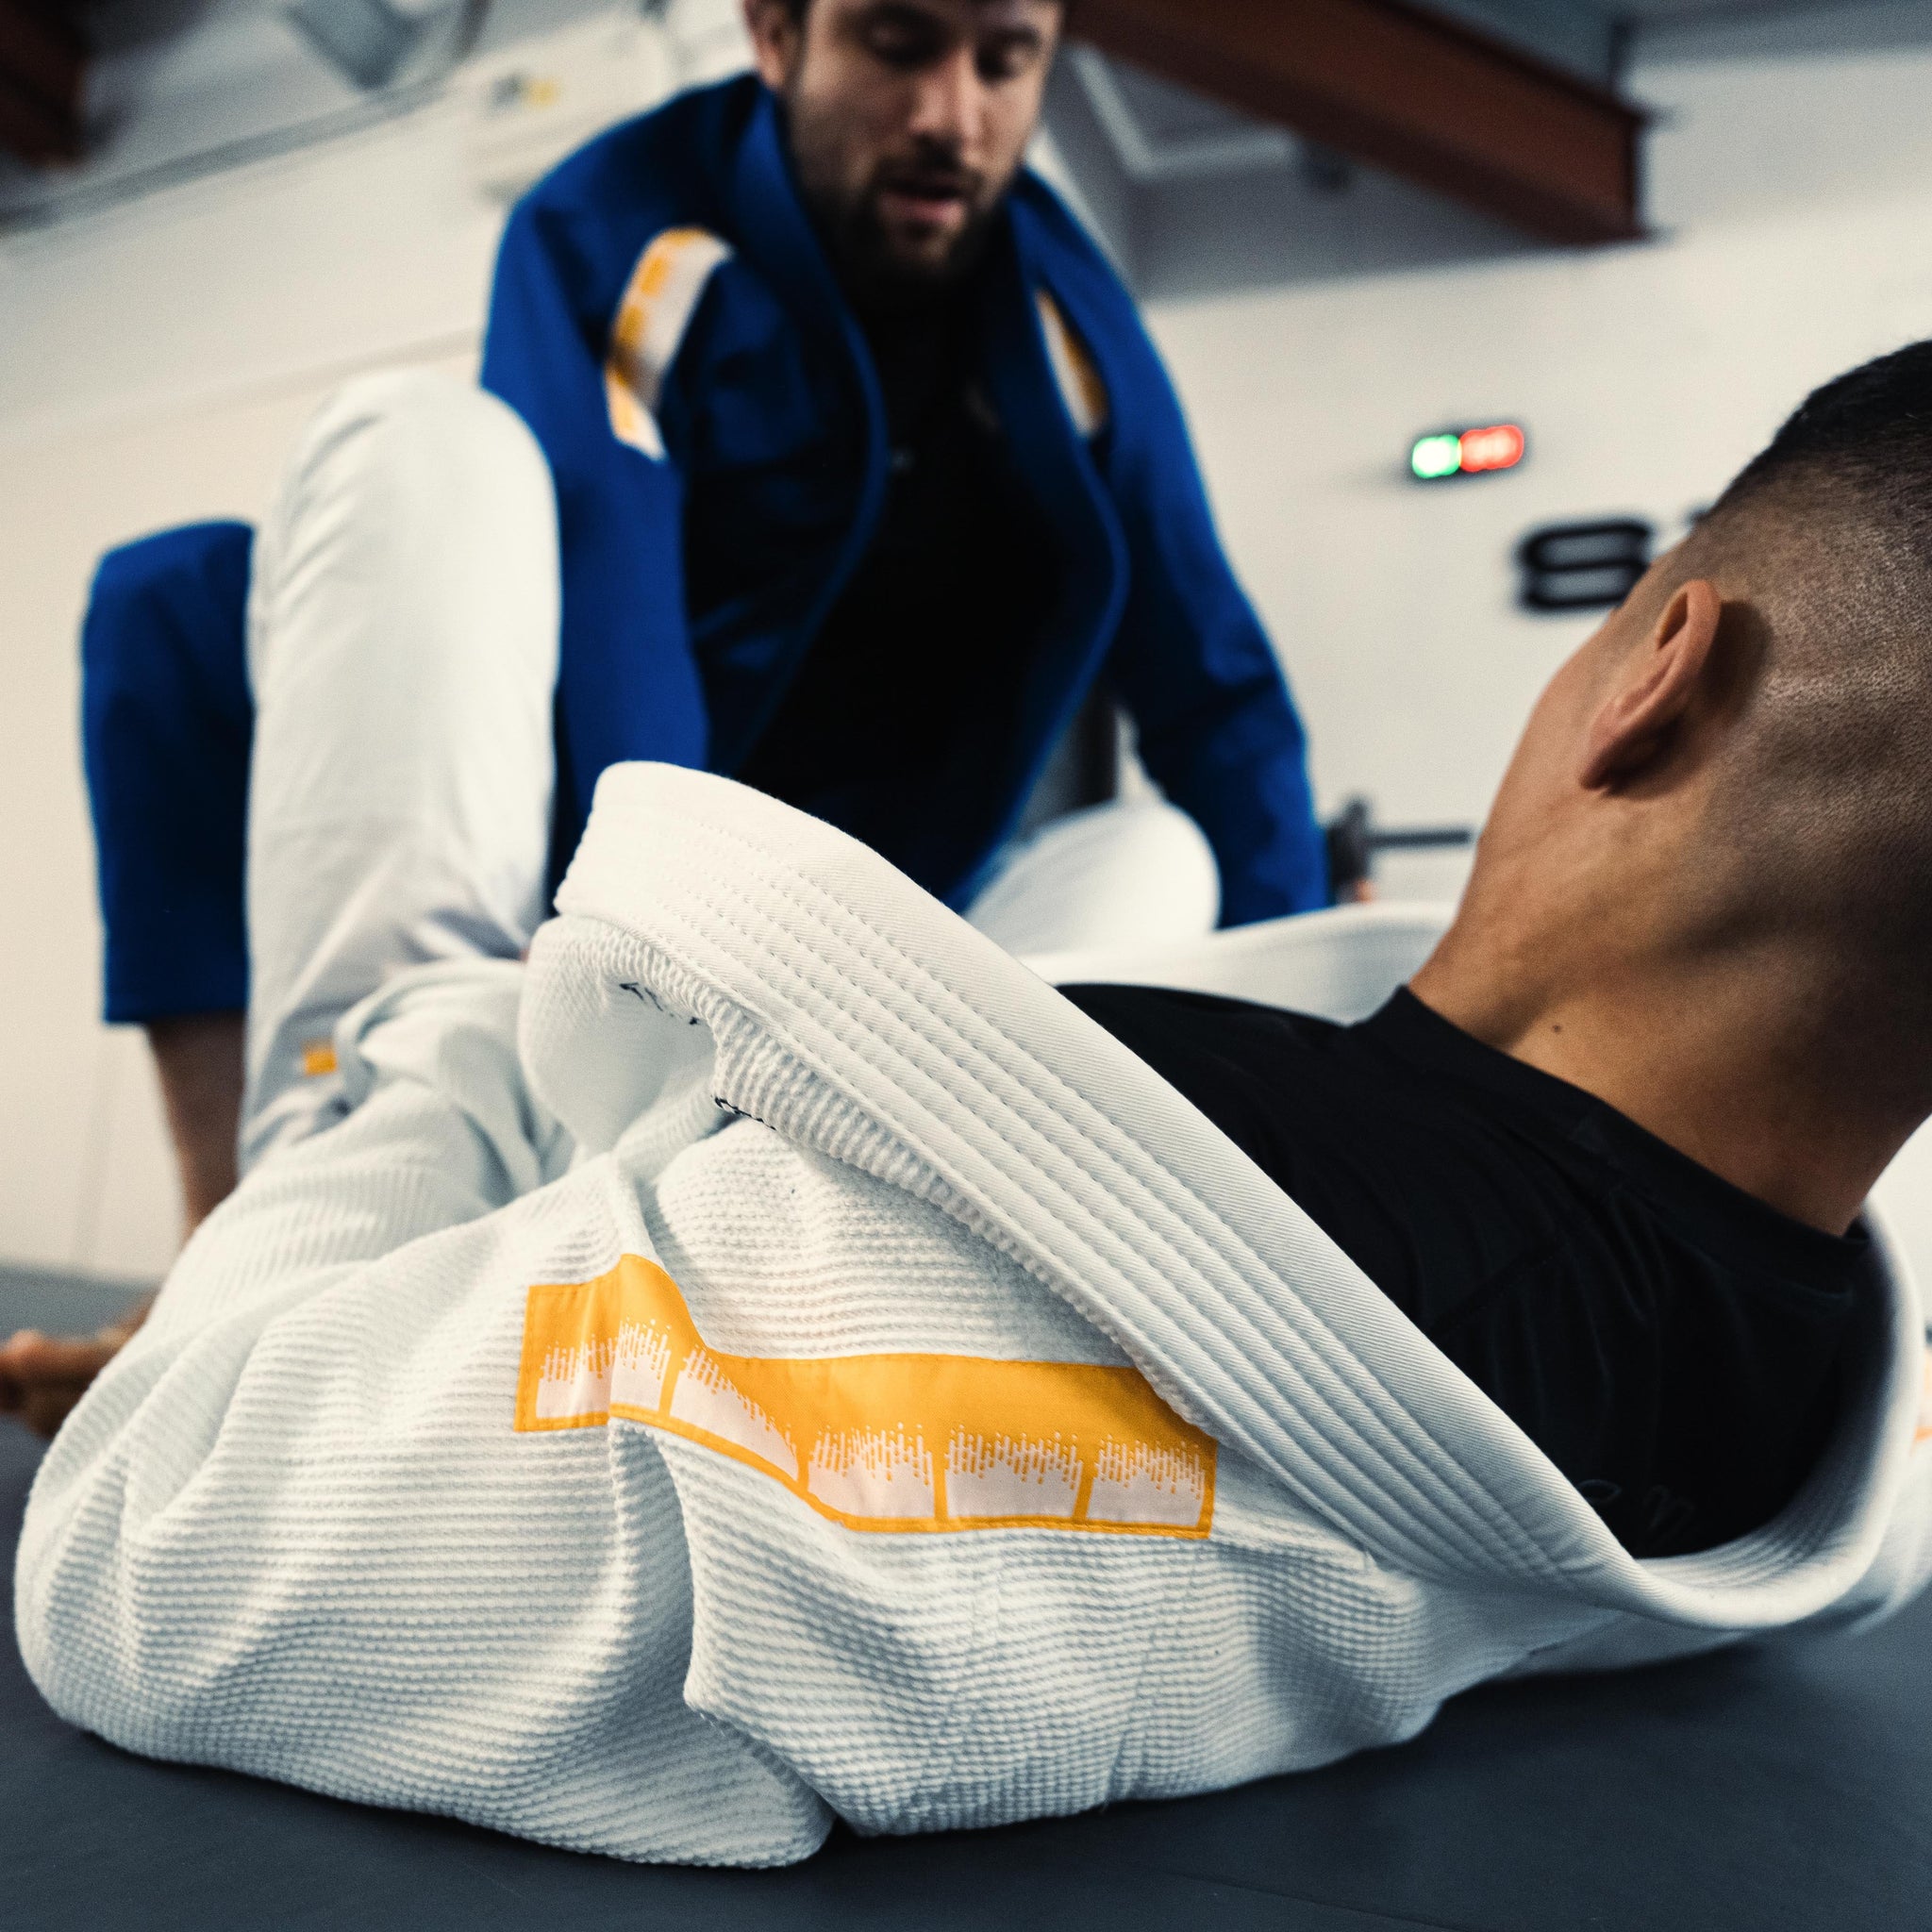 BJJ athlete using the white The Foundation Three during training